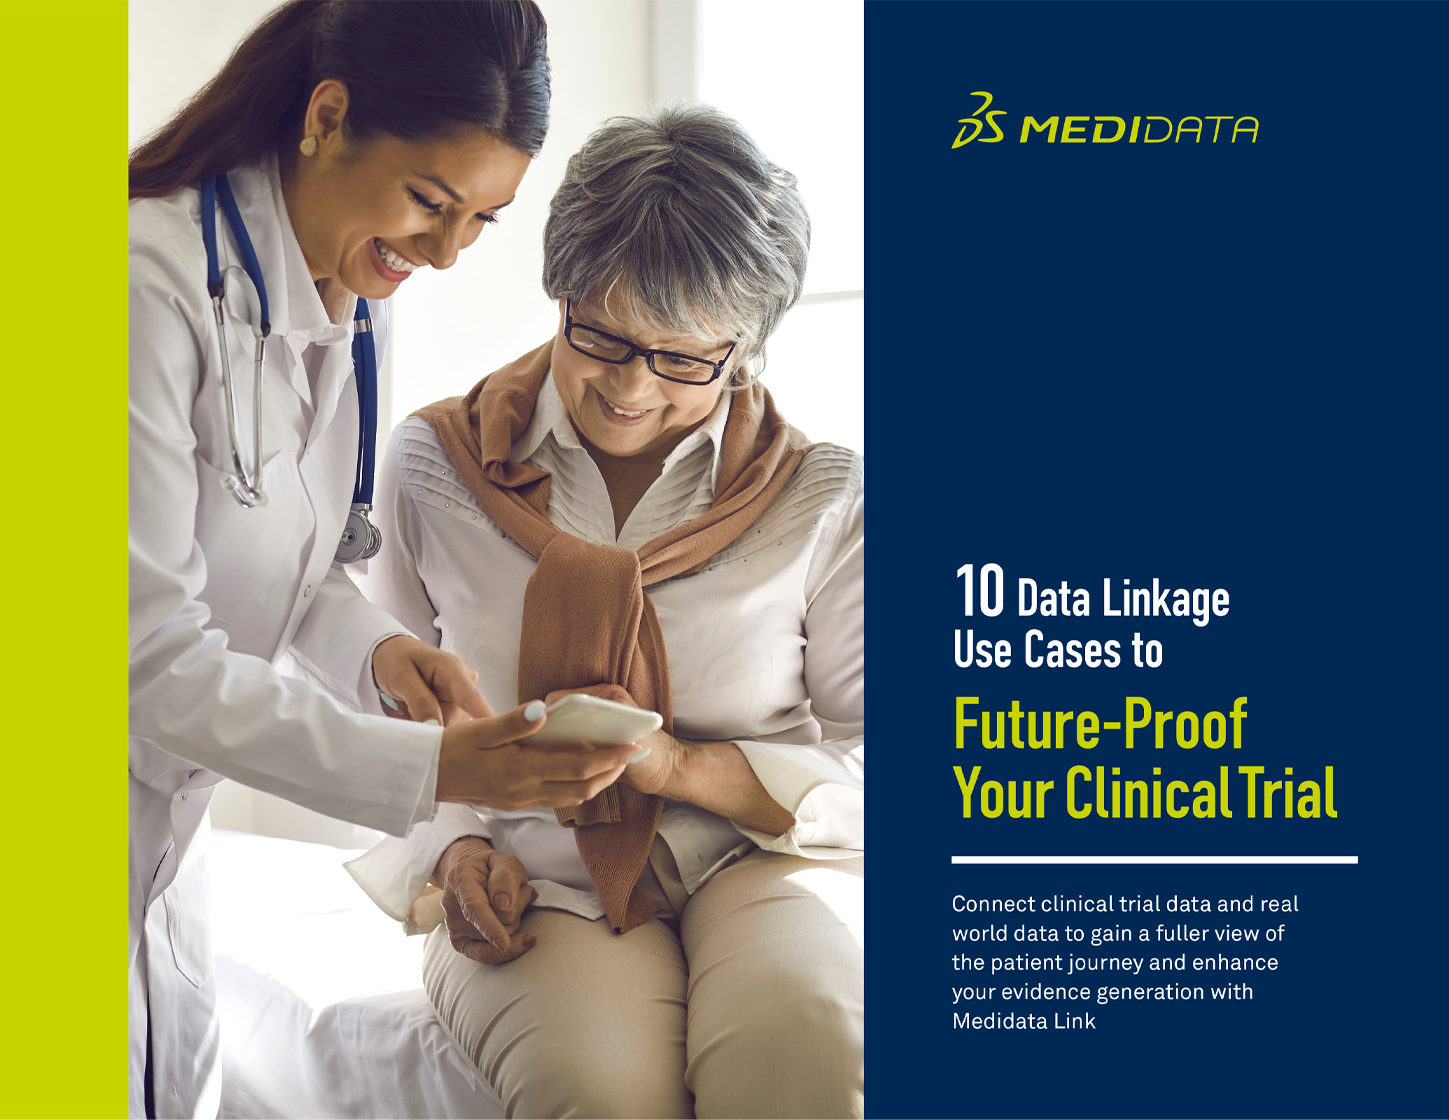 10 Data Linkage Use Cases to Future-Proof Your Clinical Trial